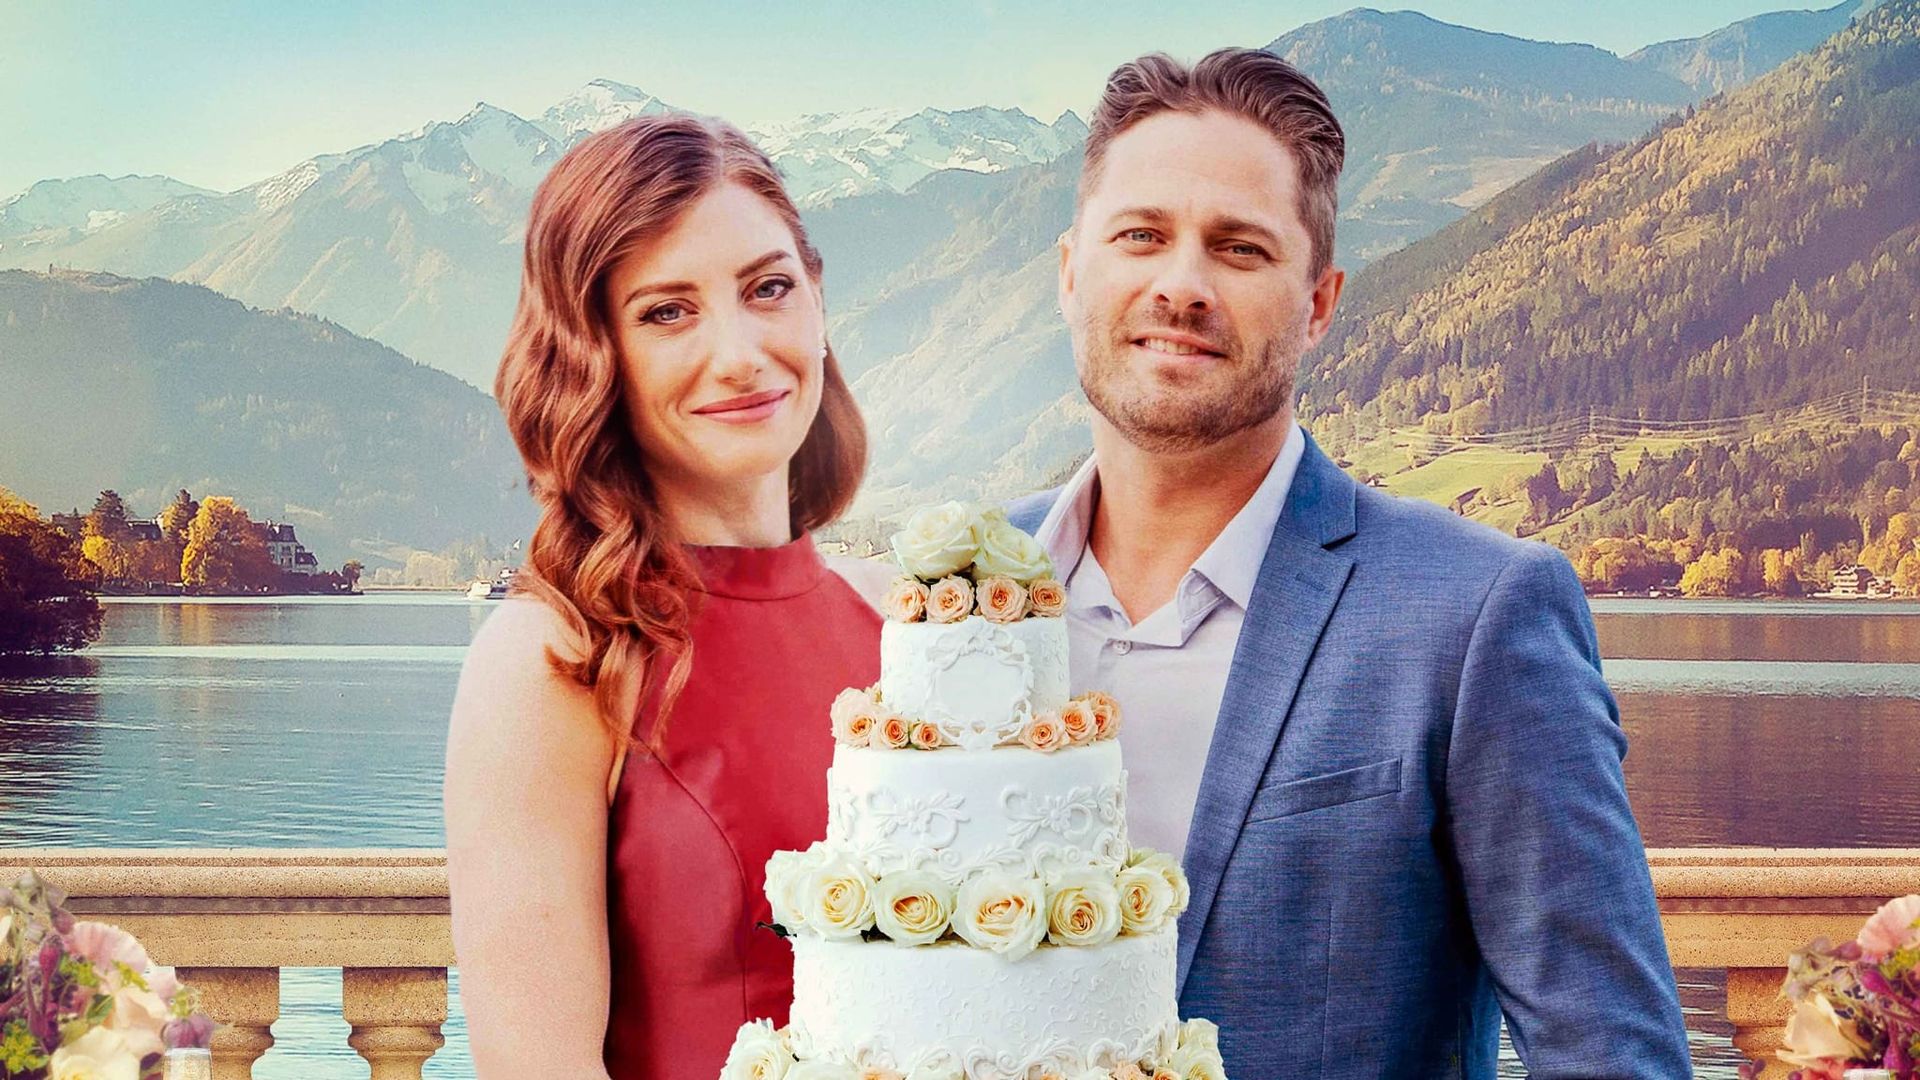 Two Chefs and a Wedding Cake background